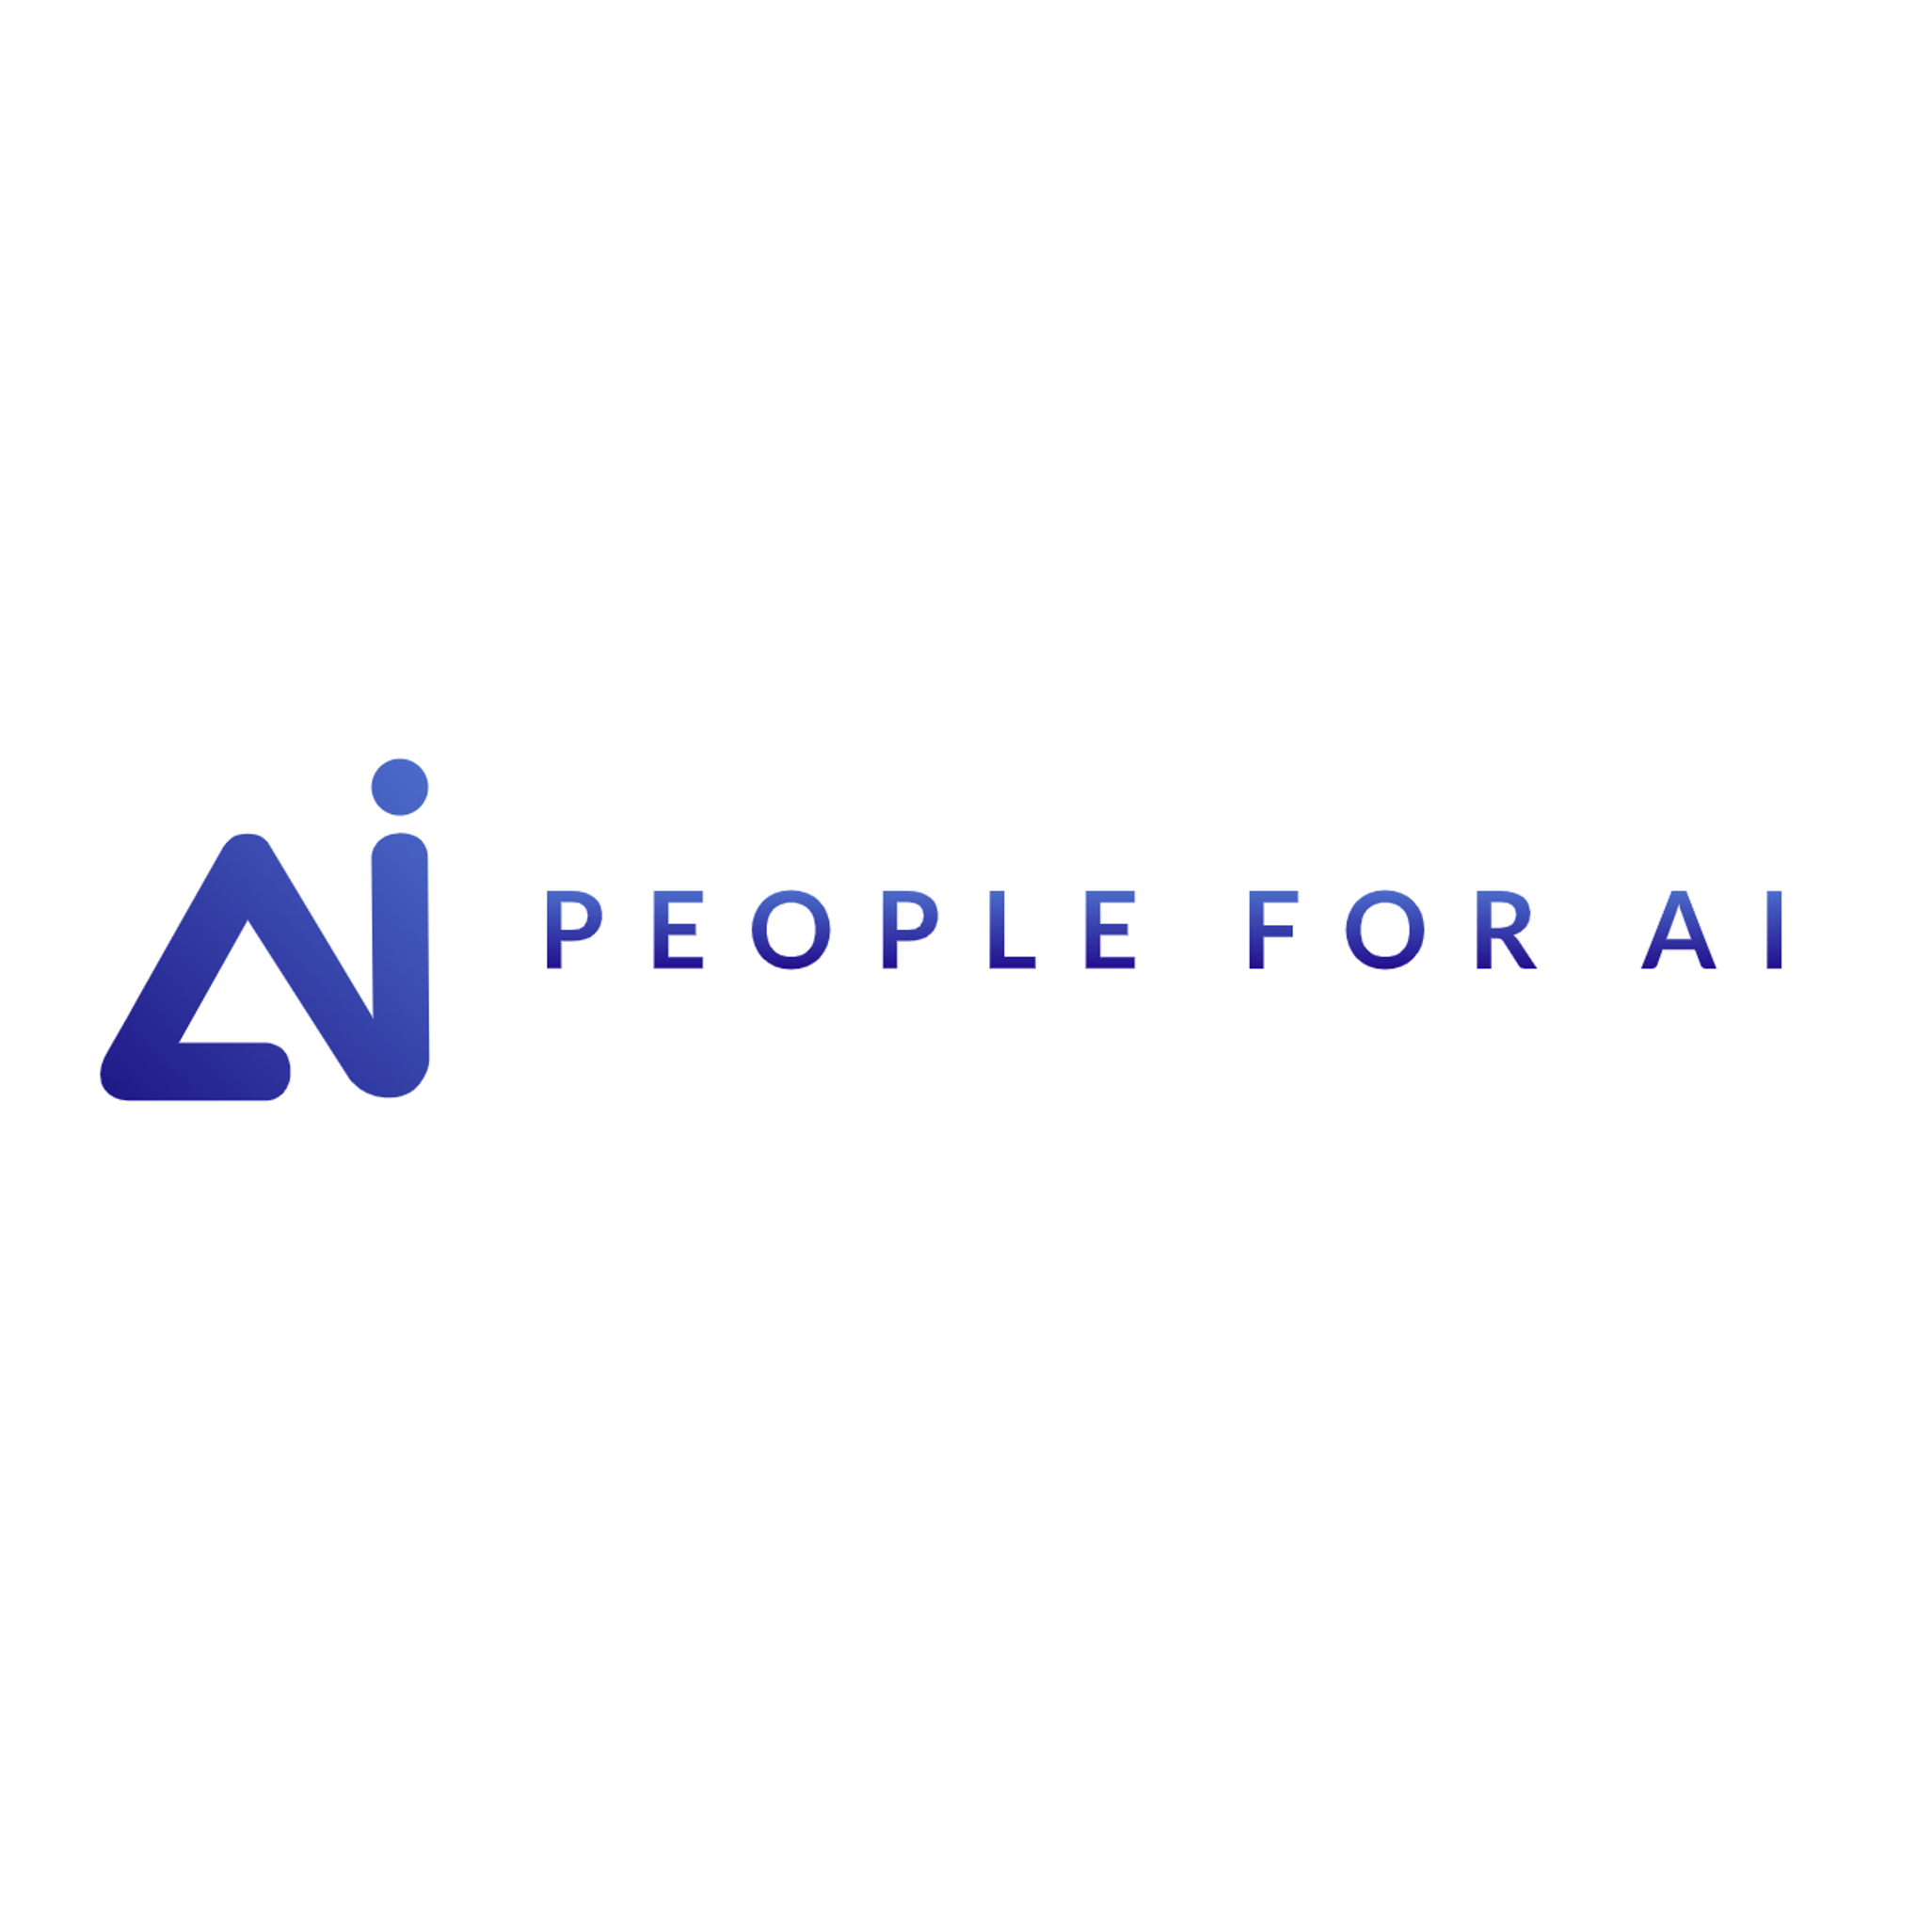 People for ai